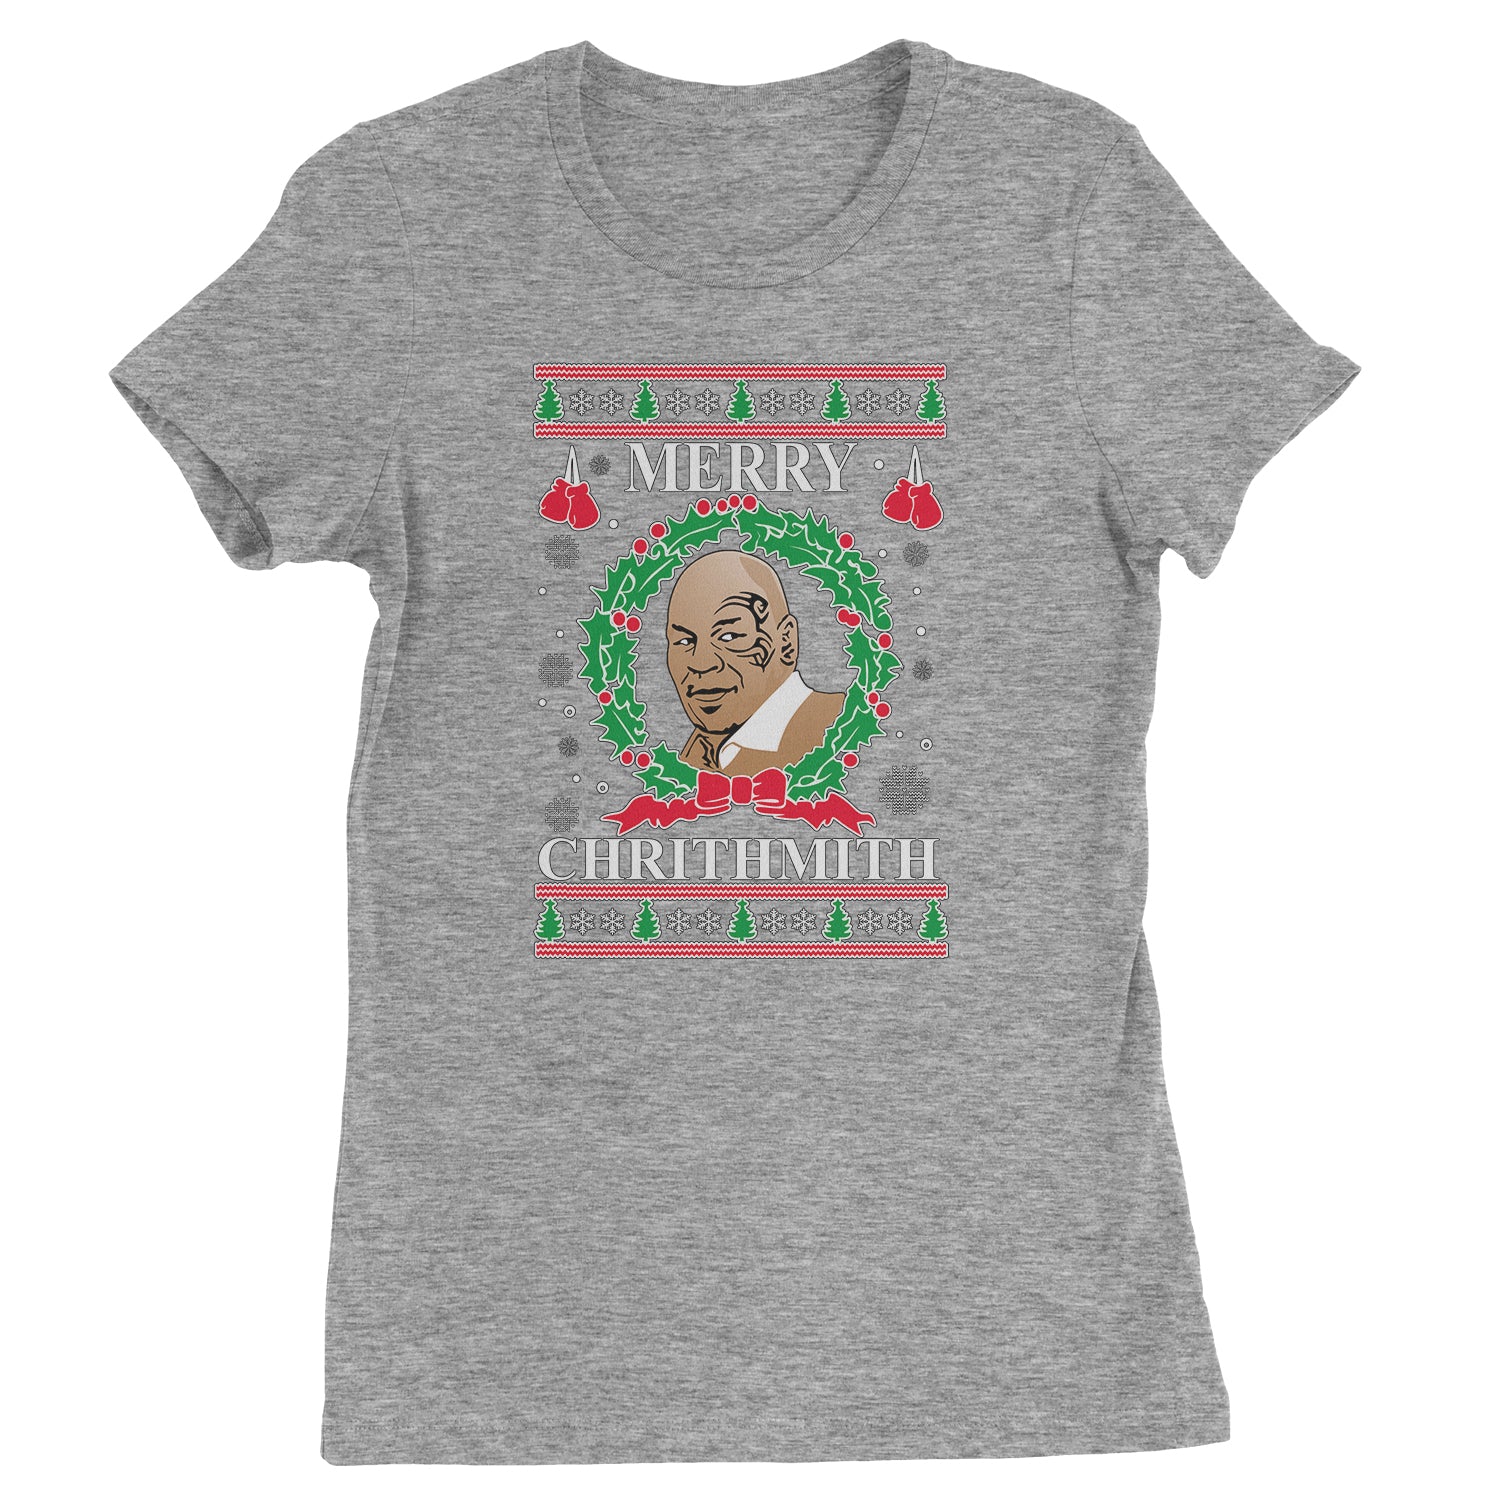 Merry Chrithmith Ugly Christmas Womens T-shirt christmas, holiday, michael, mike, sweater, tyson, ugly by Expression Tees